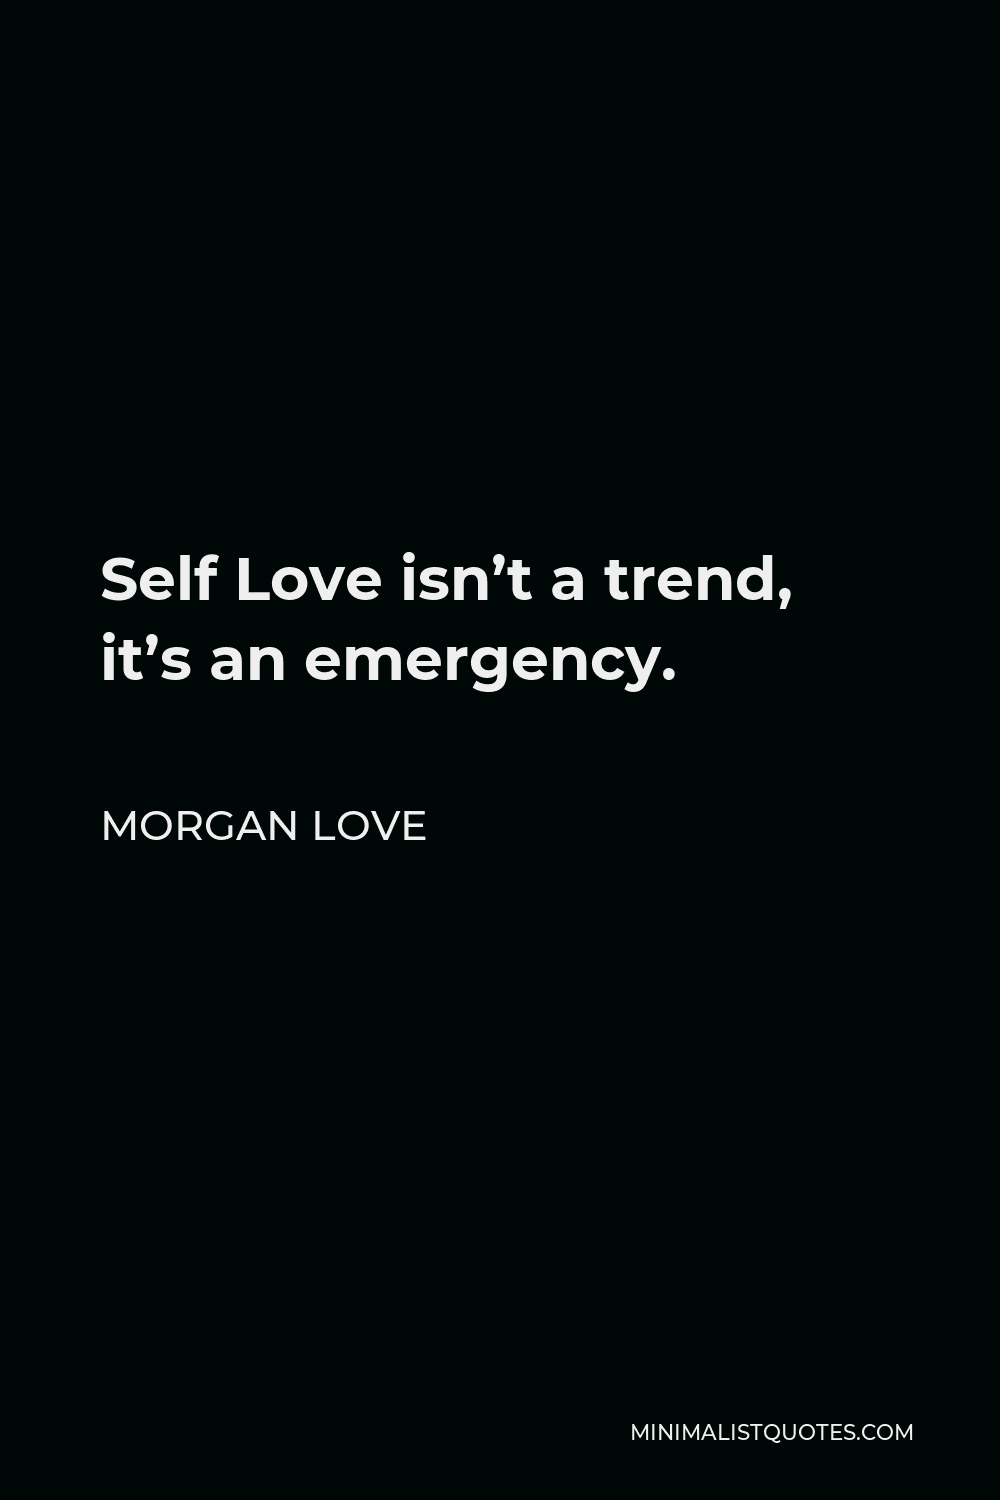 Morgan Love Quote - Self Love isn’t a trend, it’s an emergency.